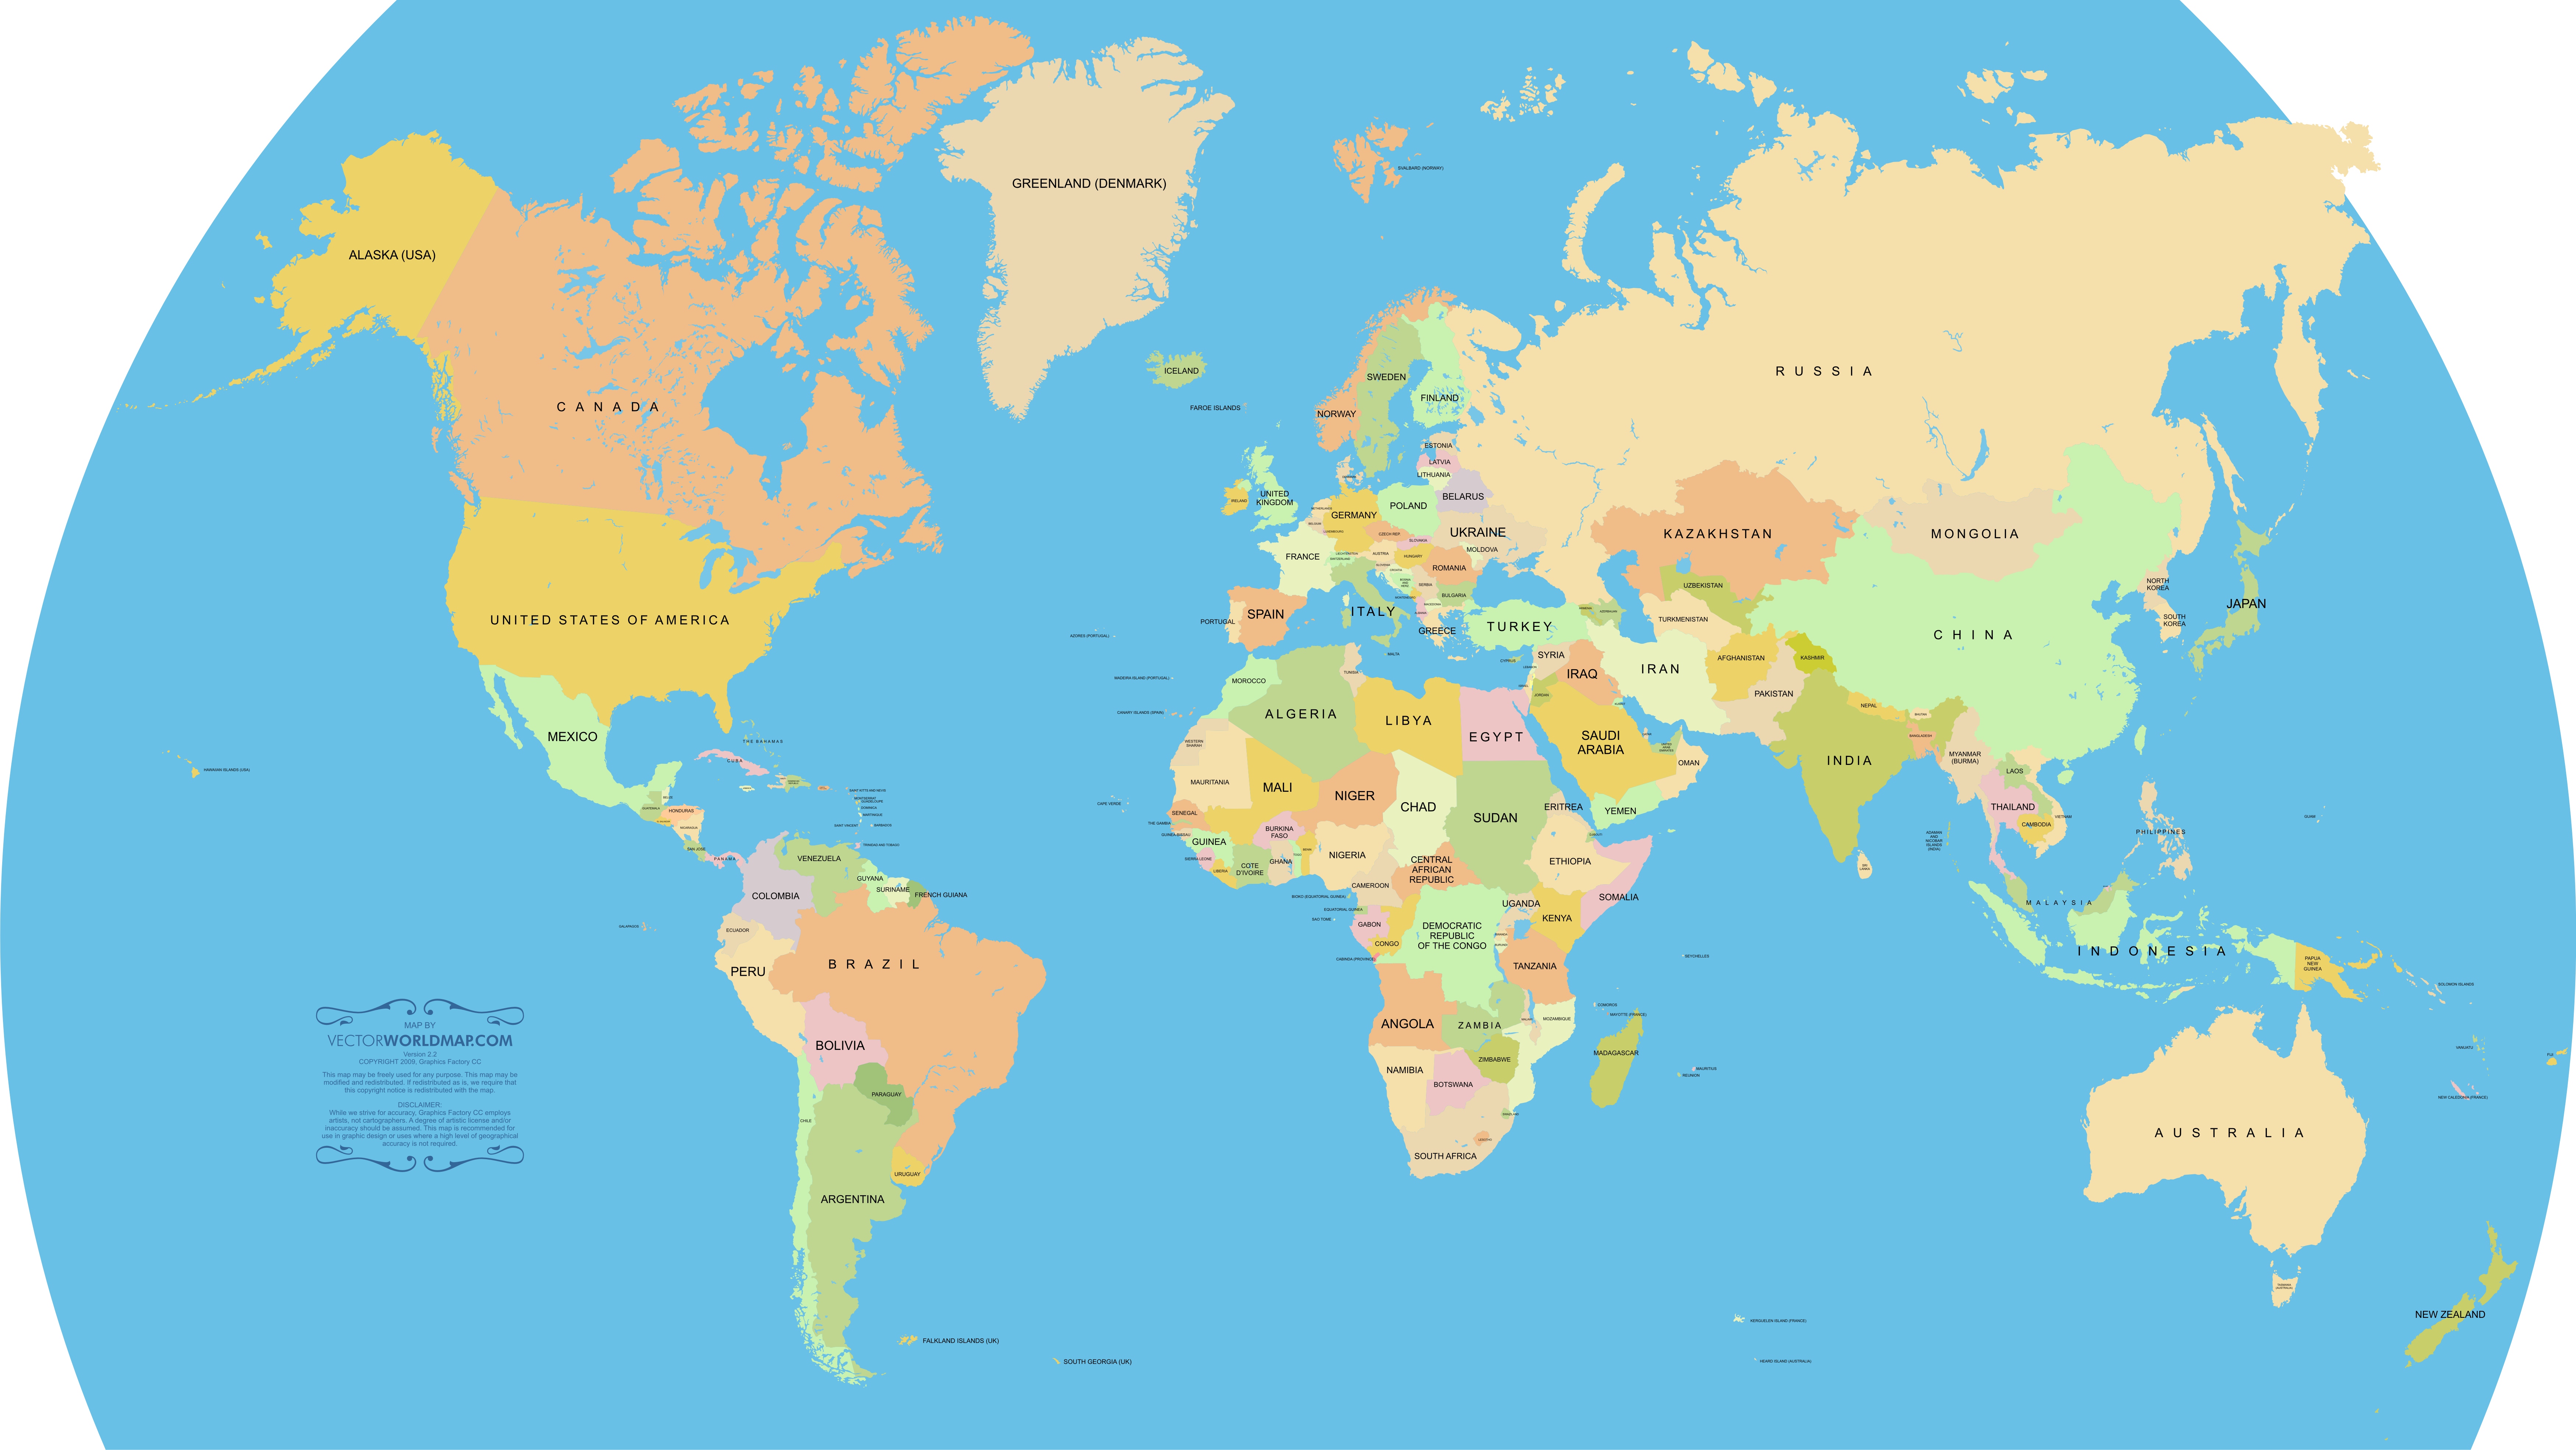 Vector World Map: A free, accurate world map in vector format